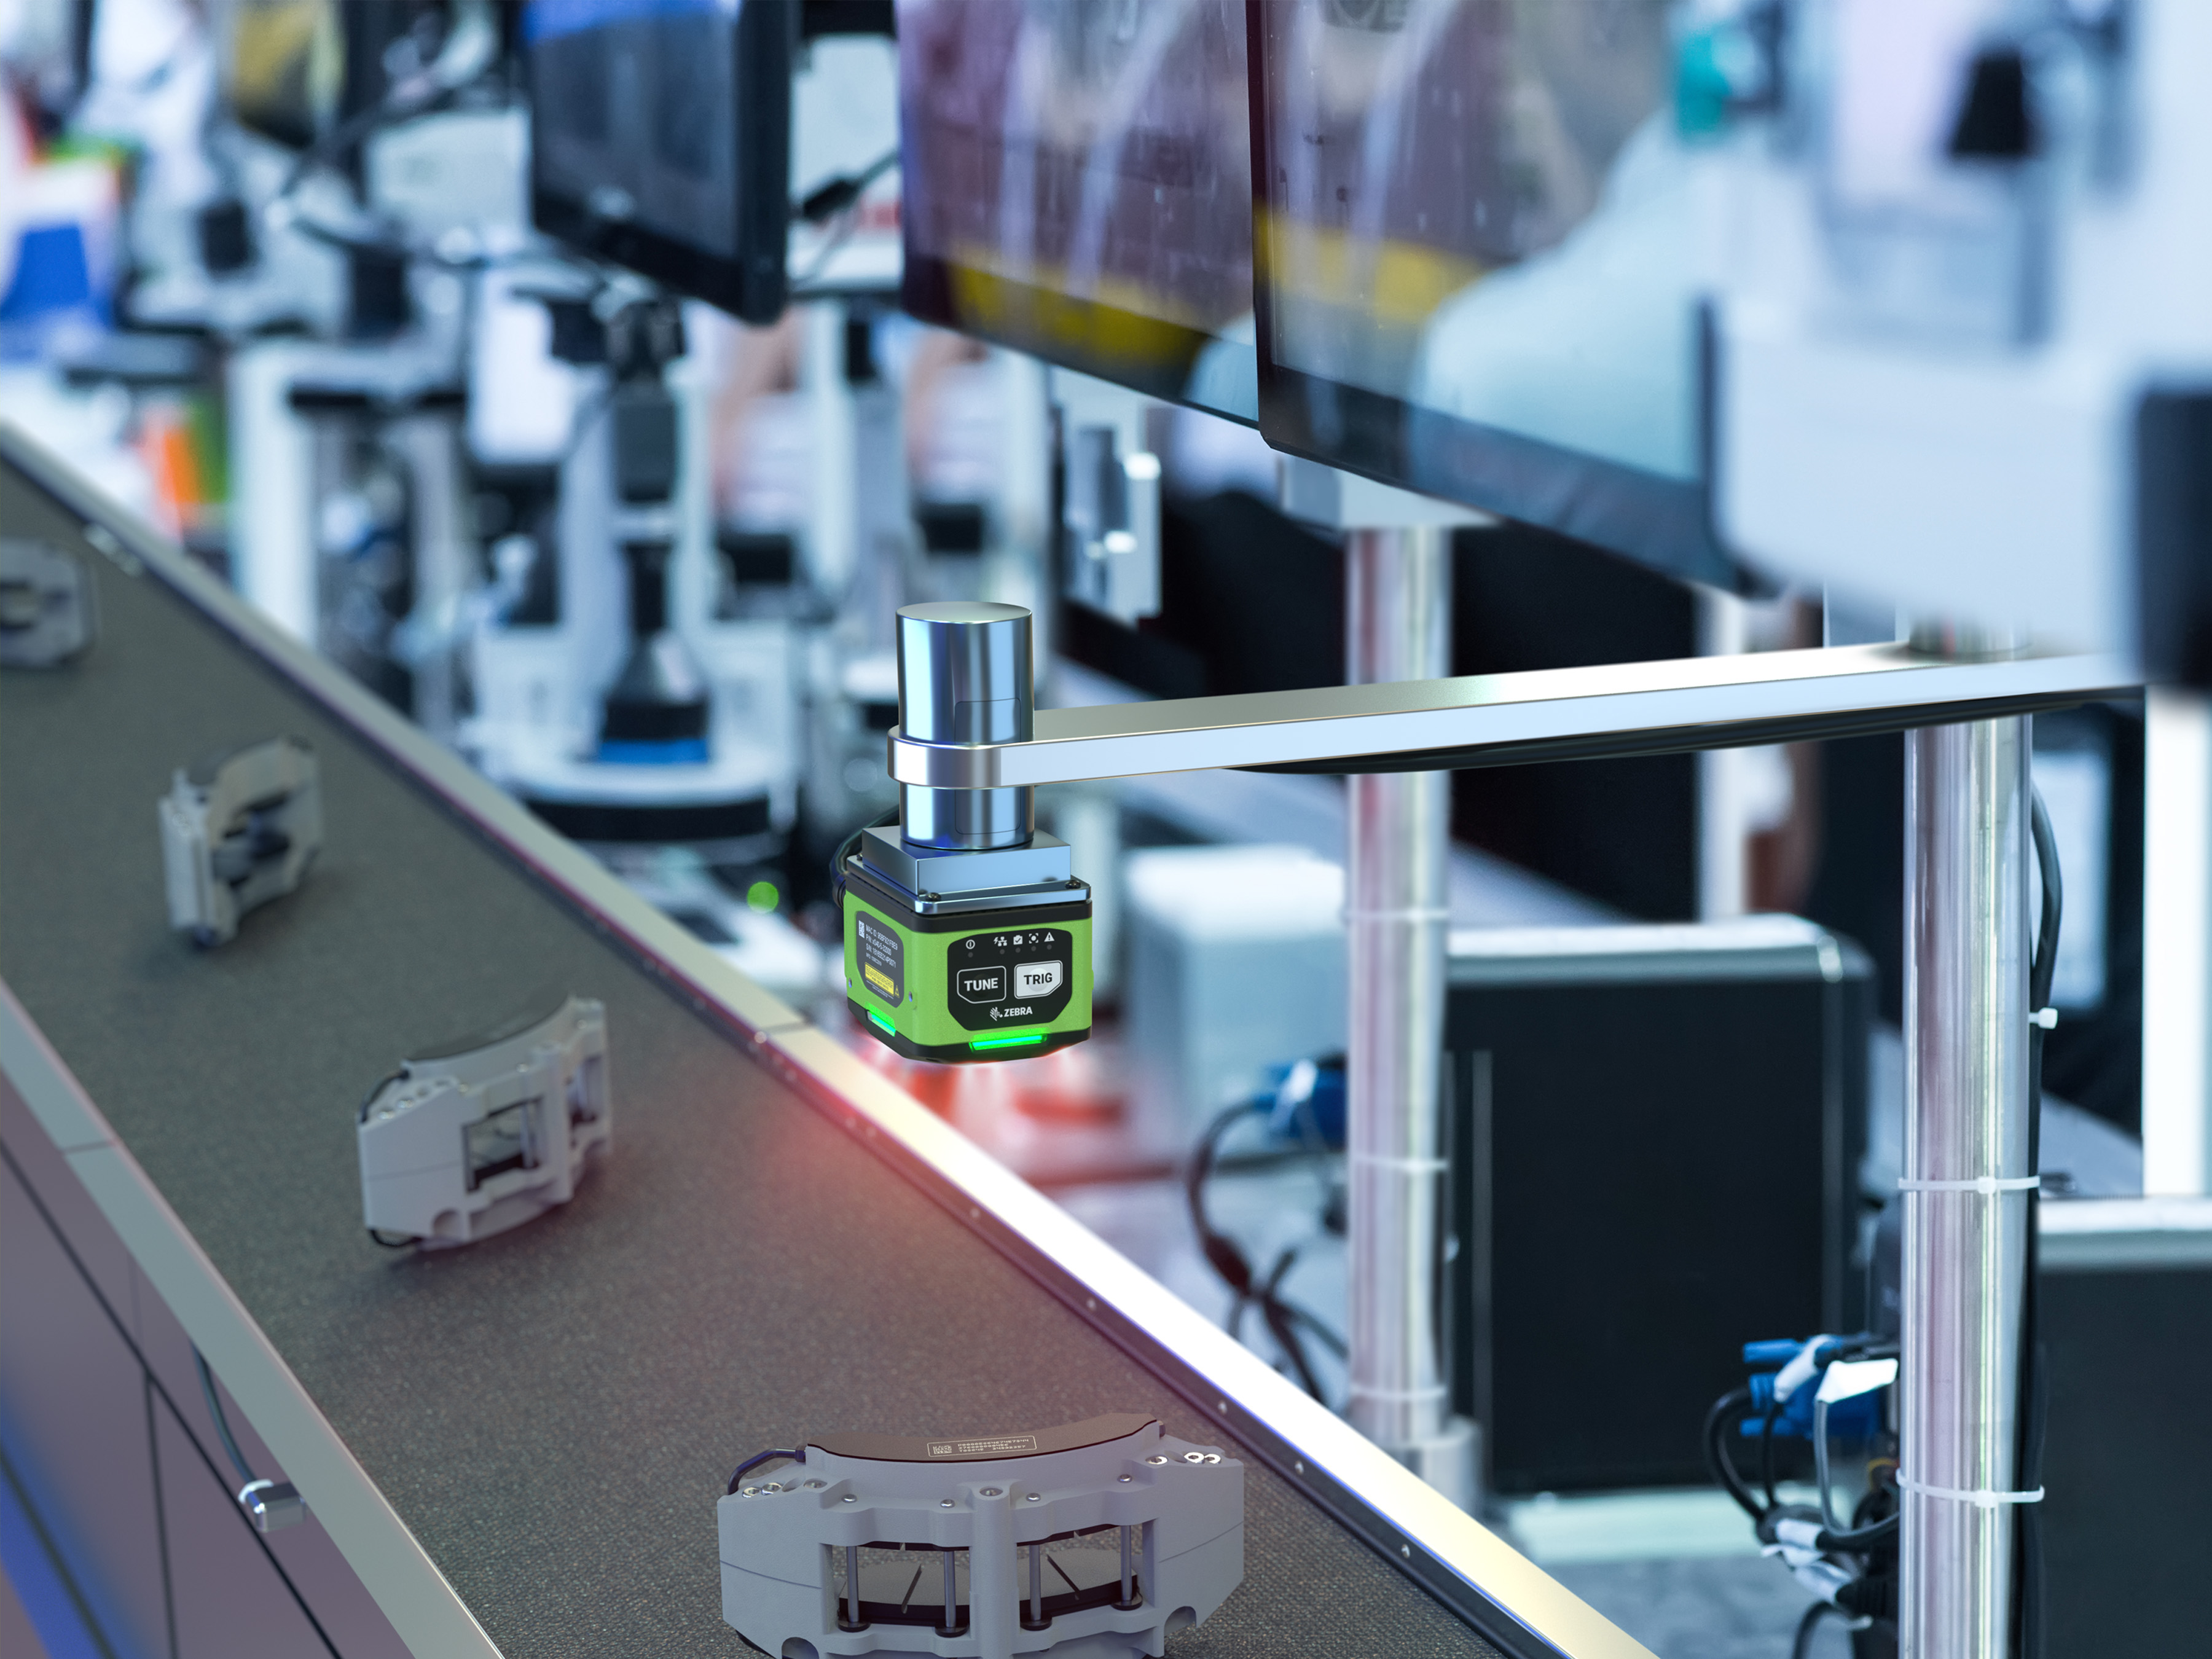 A machine vision camera is mounted on a metal arm and is pointed towards the production line. The camera is capturing high-resolution images of the products being produced on the line. The purpose of these images is to inspect the quality of the products and ensure that they meet the required specifications. The camera's advanced image processing algorithms can detect even the slightest defects or anomalies in the products, allowing for quick and efficient quality control.